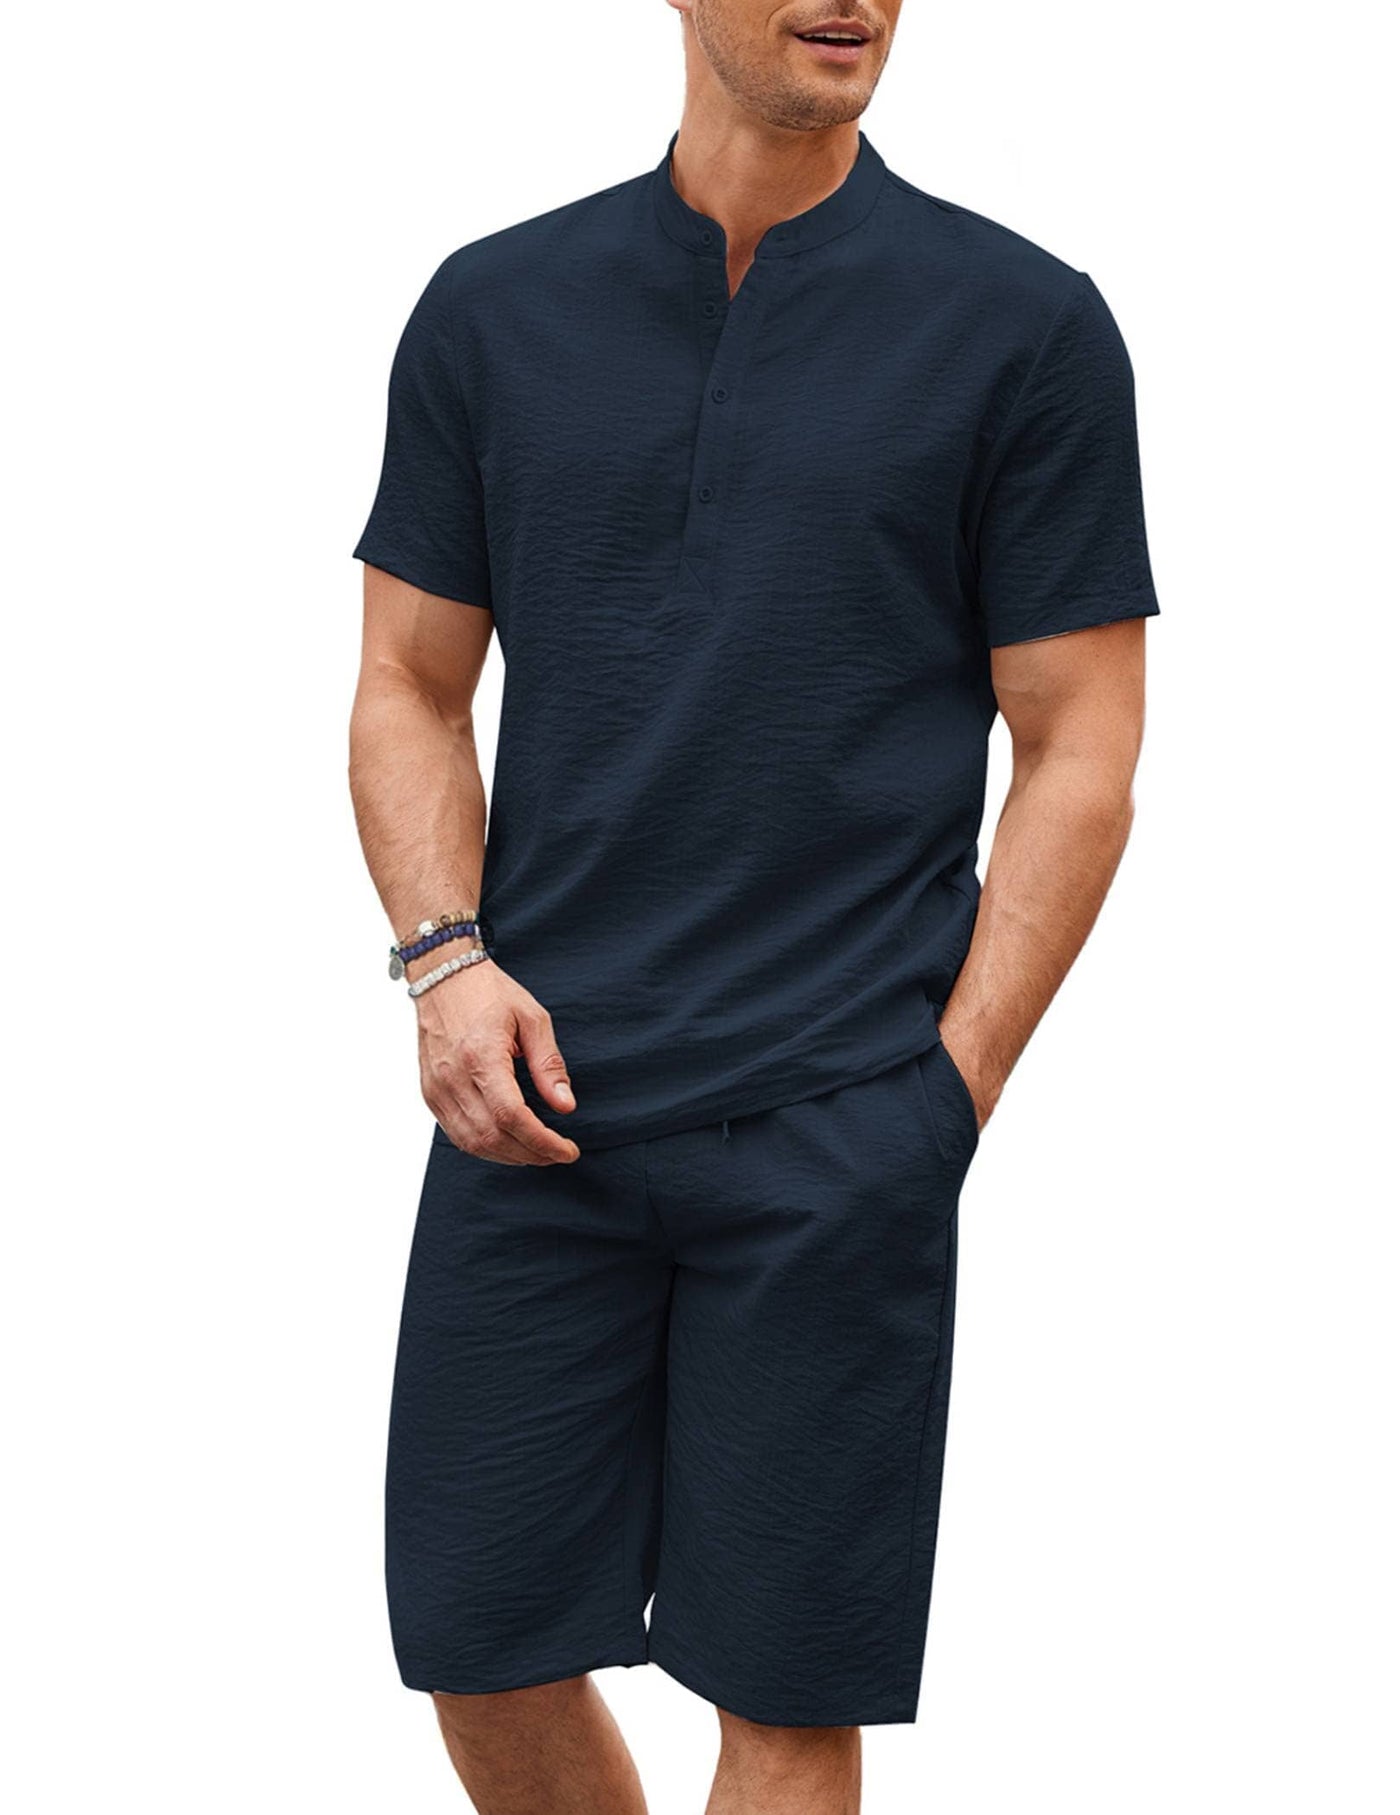 Casual 2 Pieces Cotton Linen Henley Shirt Set (US Only) Sets coofandy Navy Blue S 